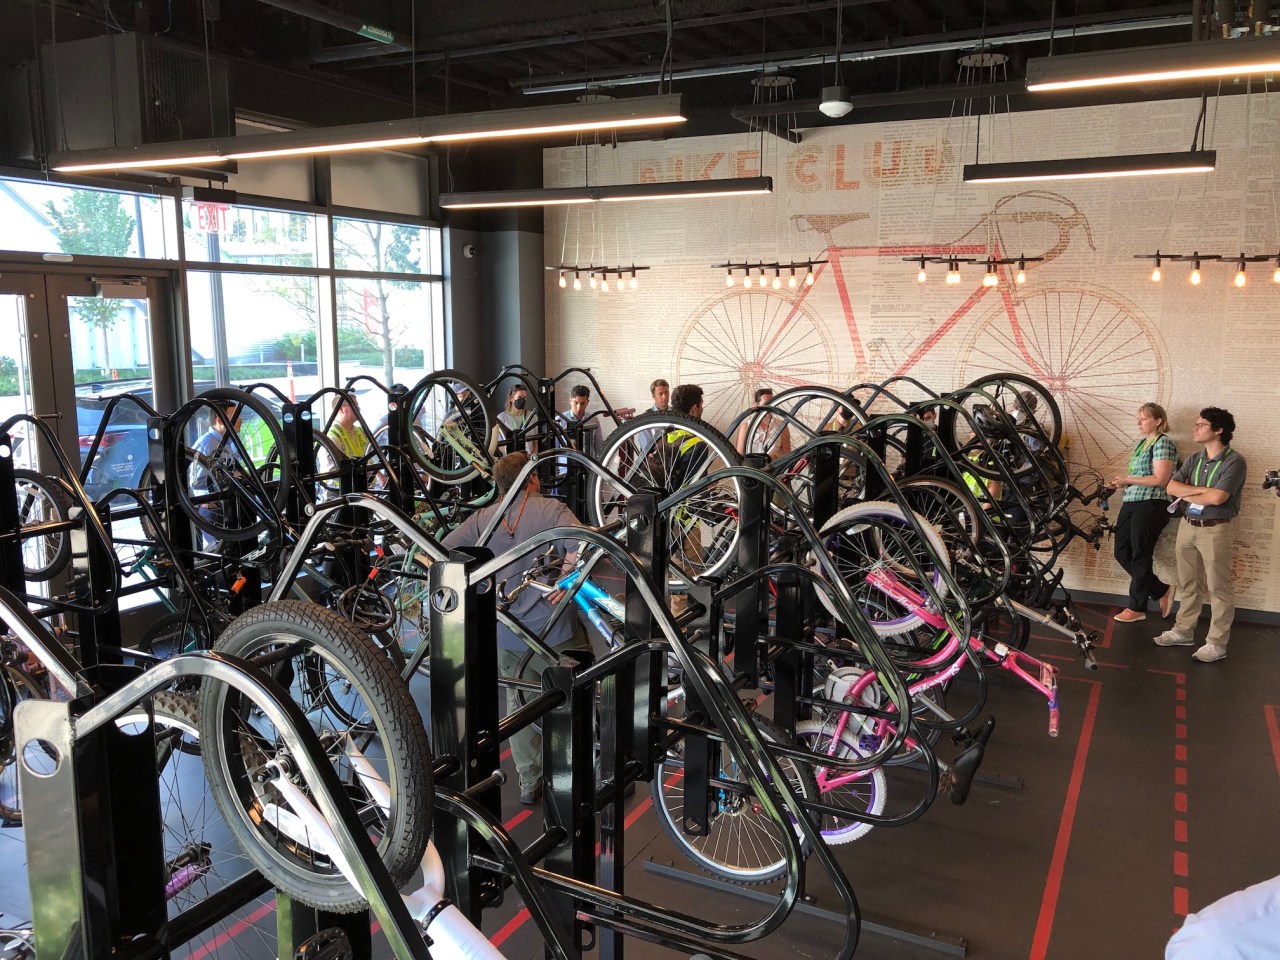 A room full of bikes hanging from vertical racks. The back wall features a mural of a bicycle and the wall to the left is full of windows looking out onto the sidewalk, including an exterior door.